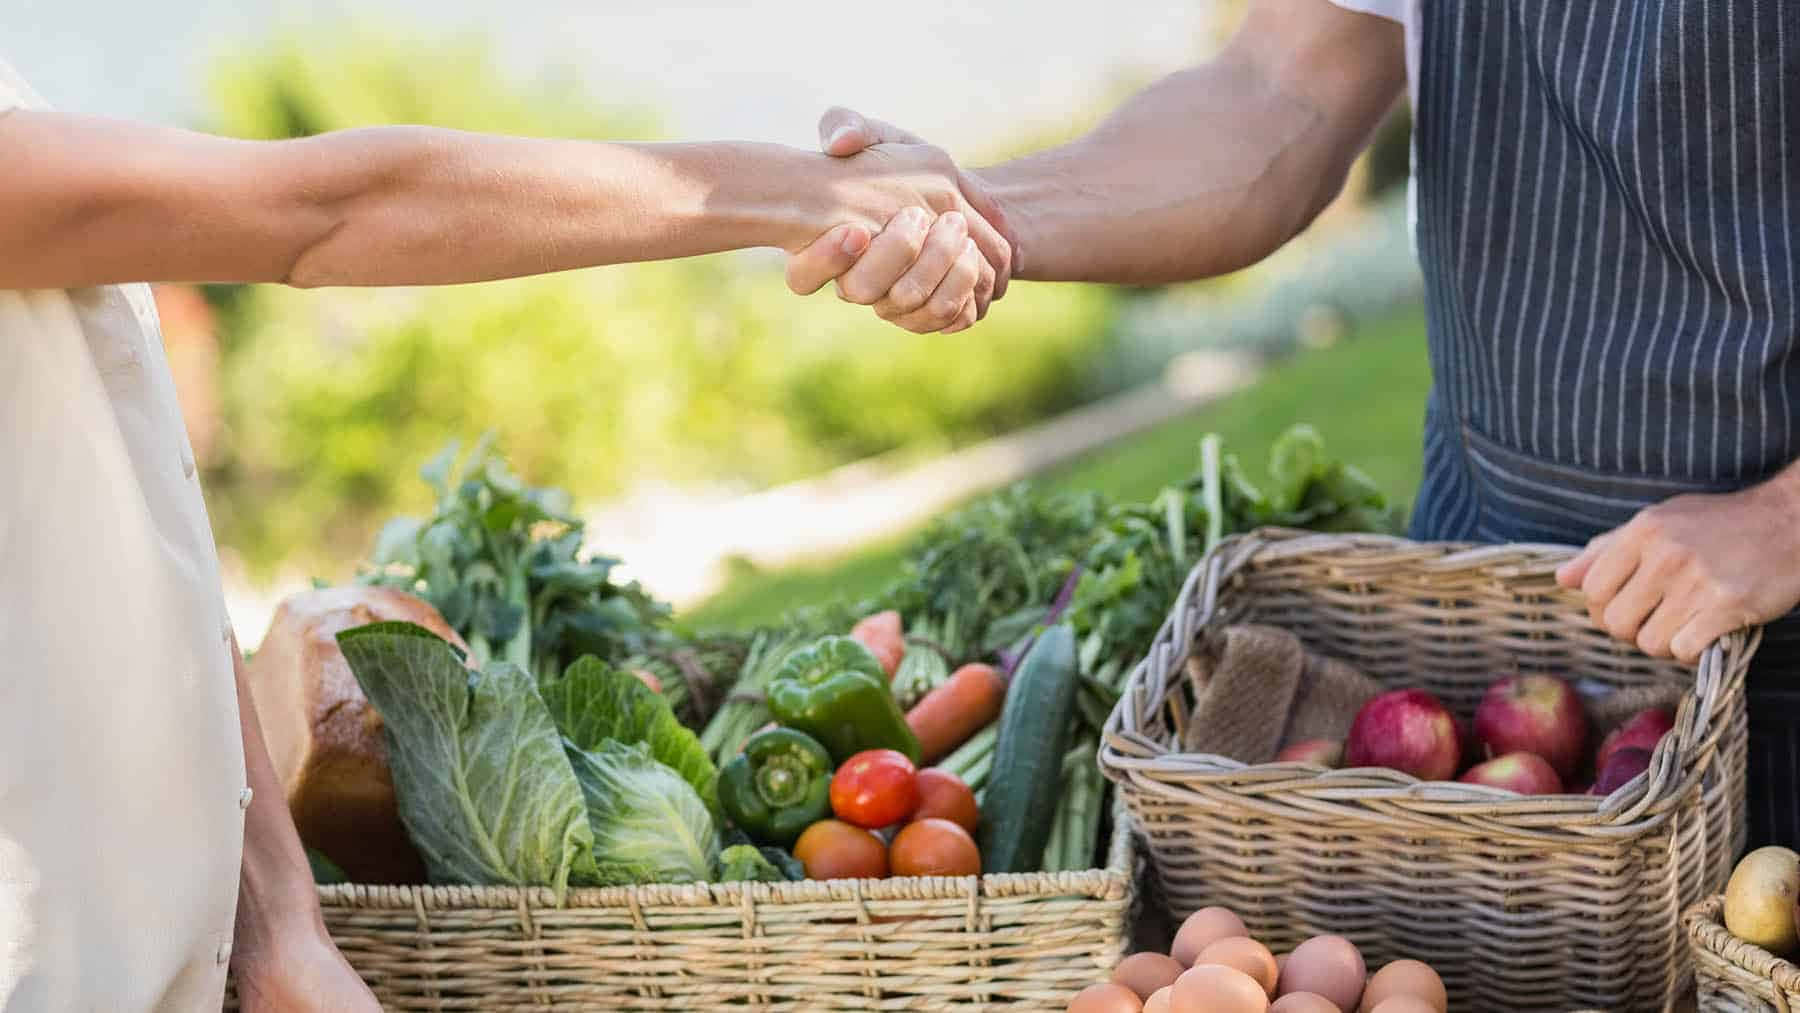 A Man And Woman Shaking Hands In Front Of A Basket Of Vegetables